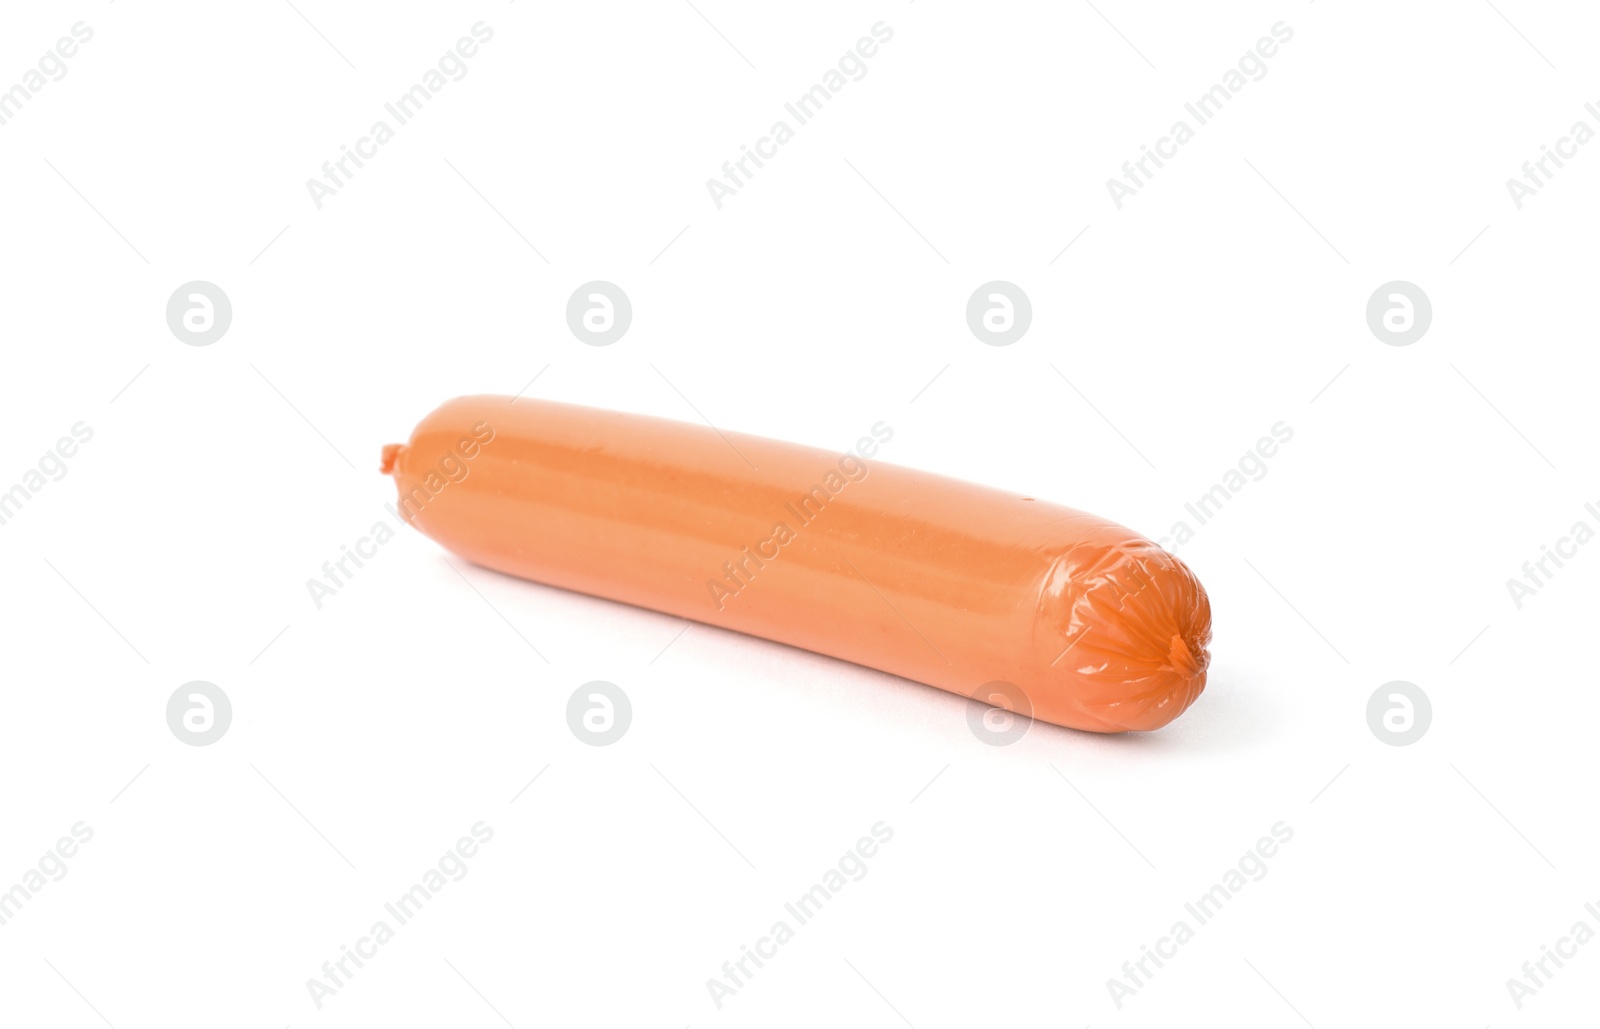 Photo of Encased sausage on white background. Meat product